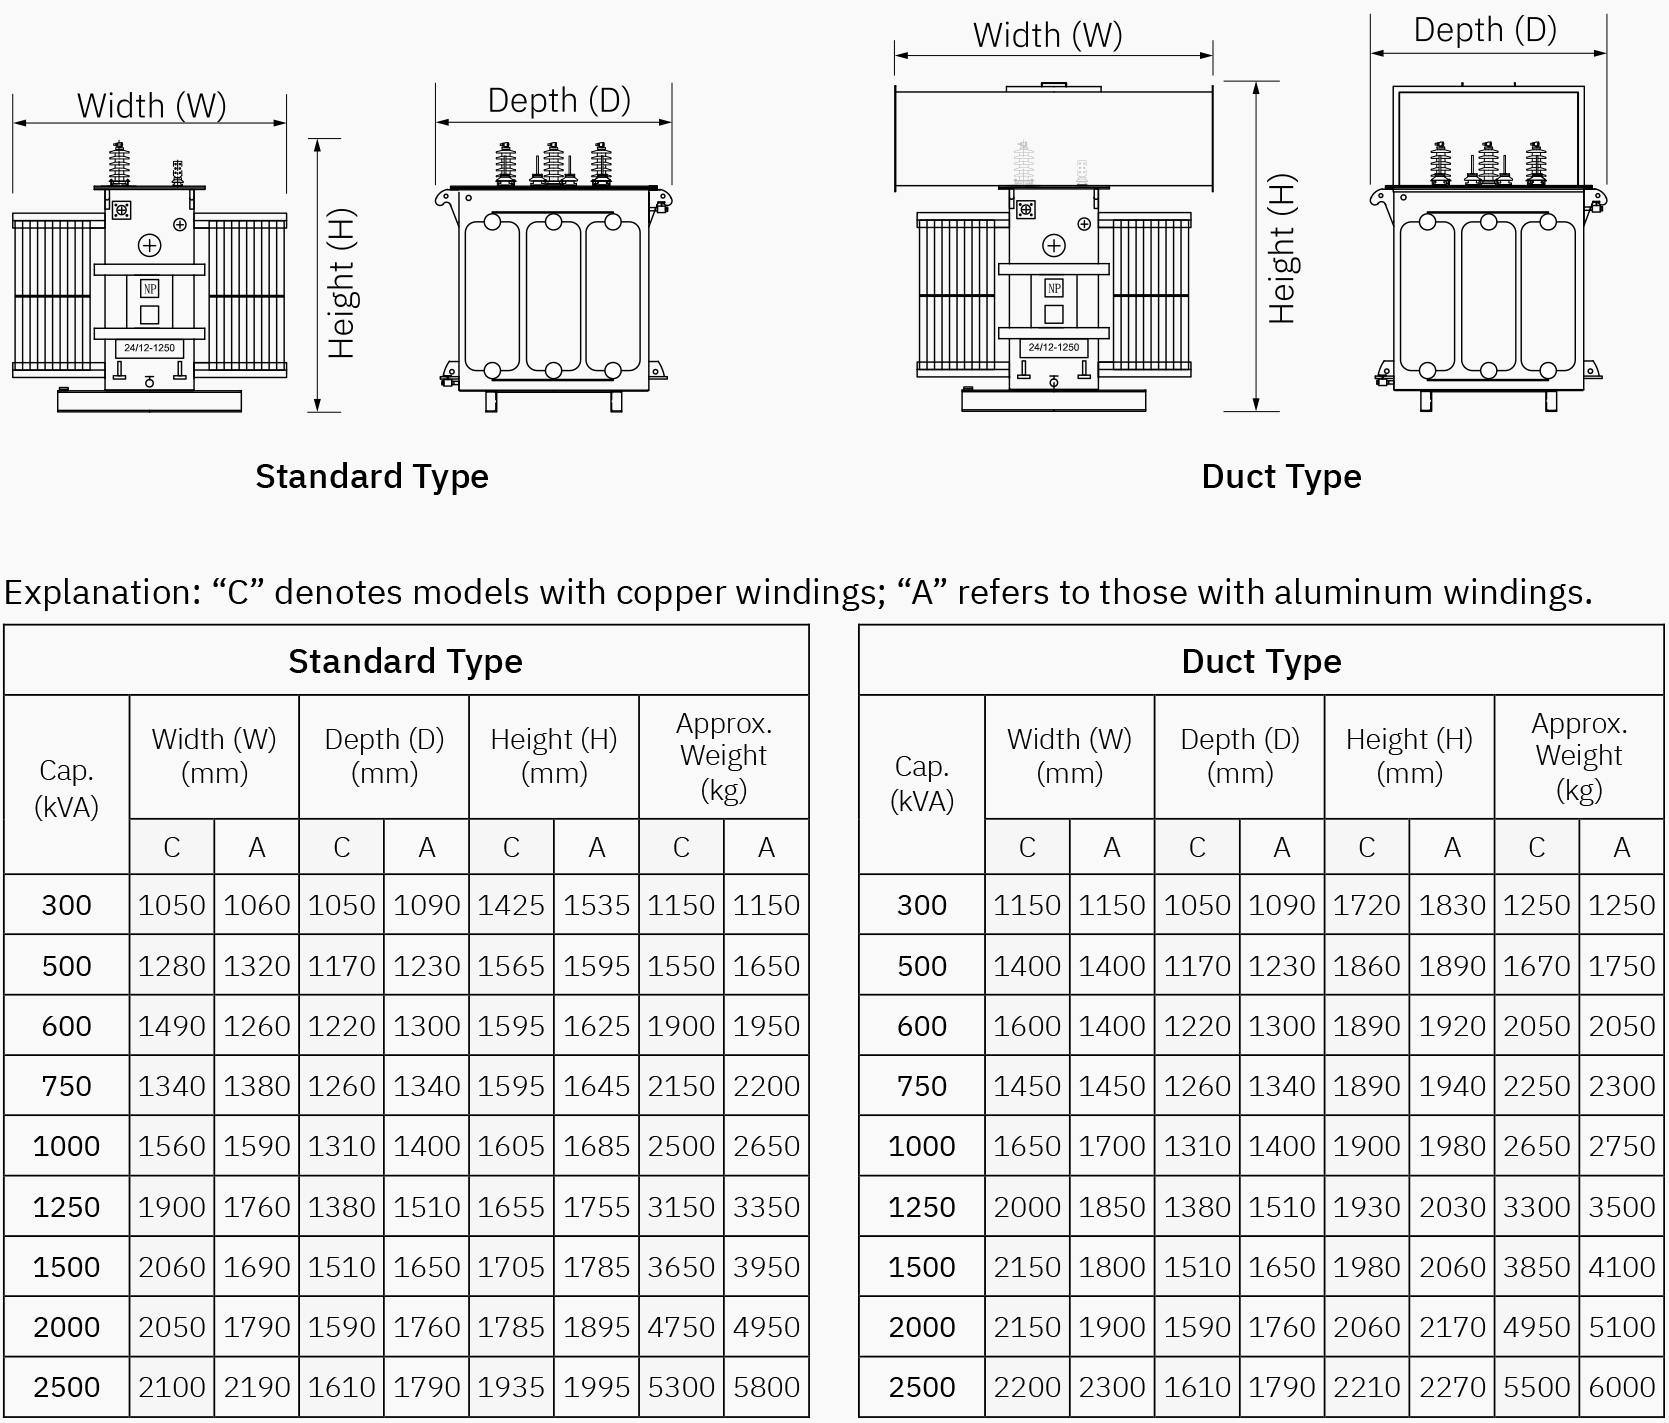 MV Oil Transformers - Drawings and Selection Tables